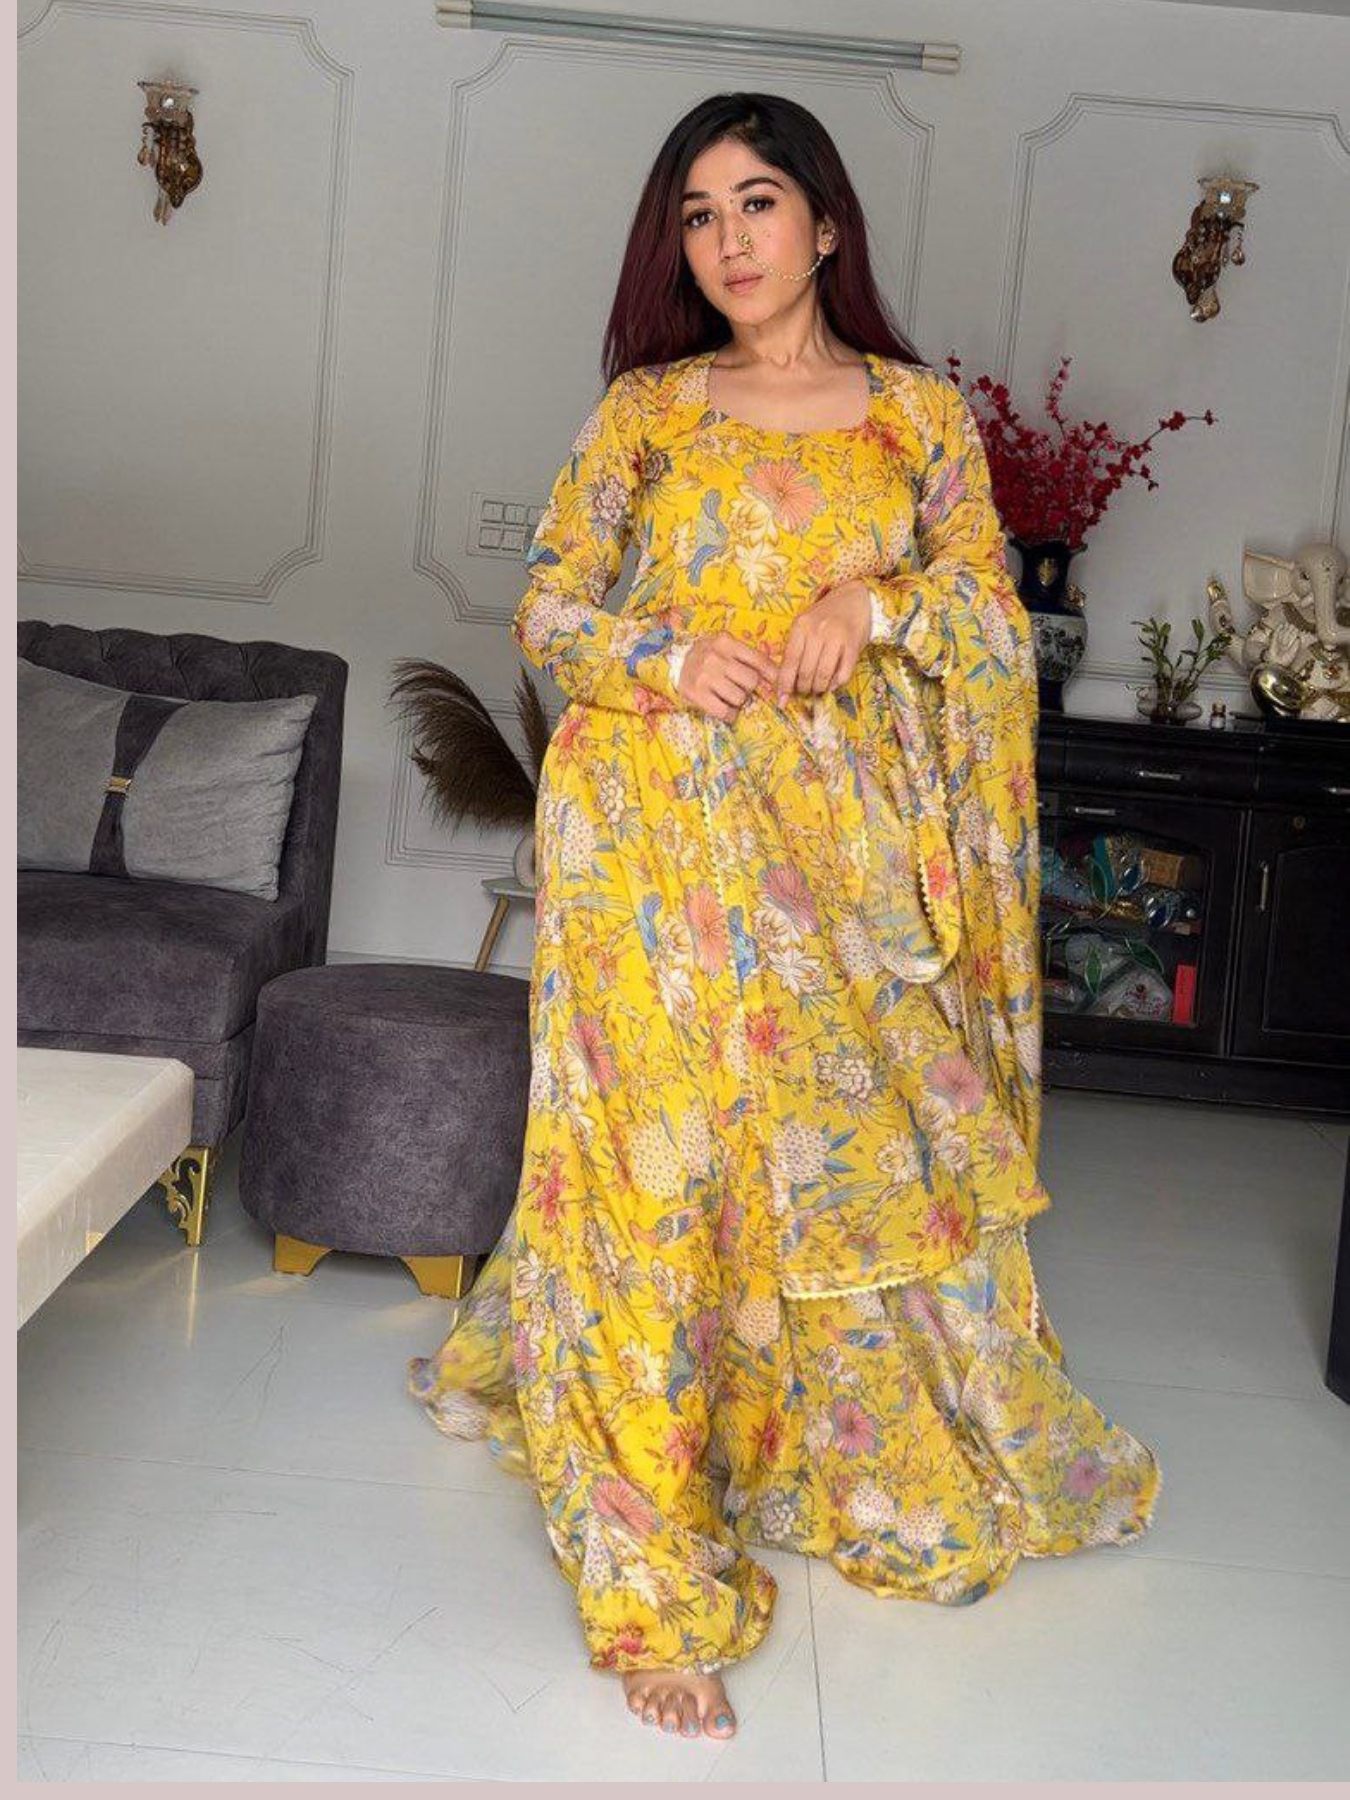 Shop Now❤️Colorauction presents this beautiful vibrant Printed Yellow Crepe  Kurti as your wardrobe essential. Team it with… | Fashion, Fashion website,  Fashion post